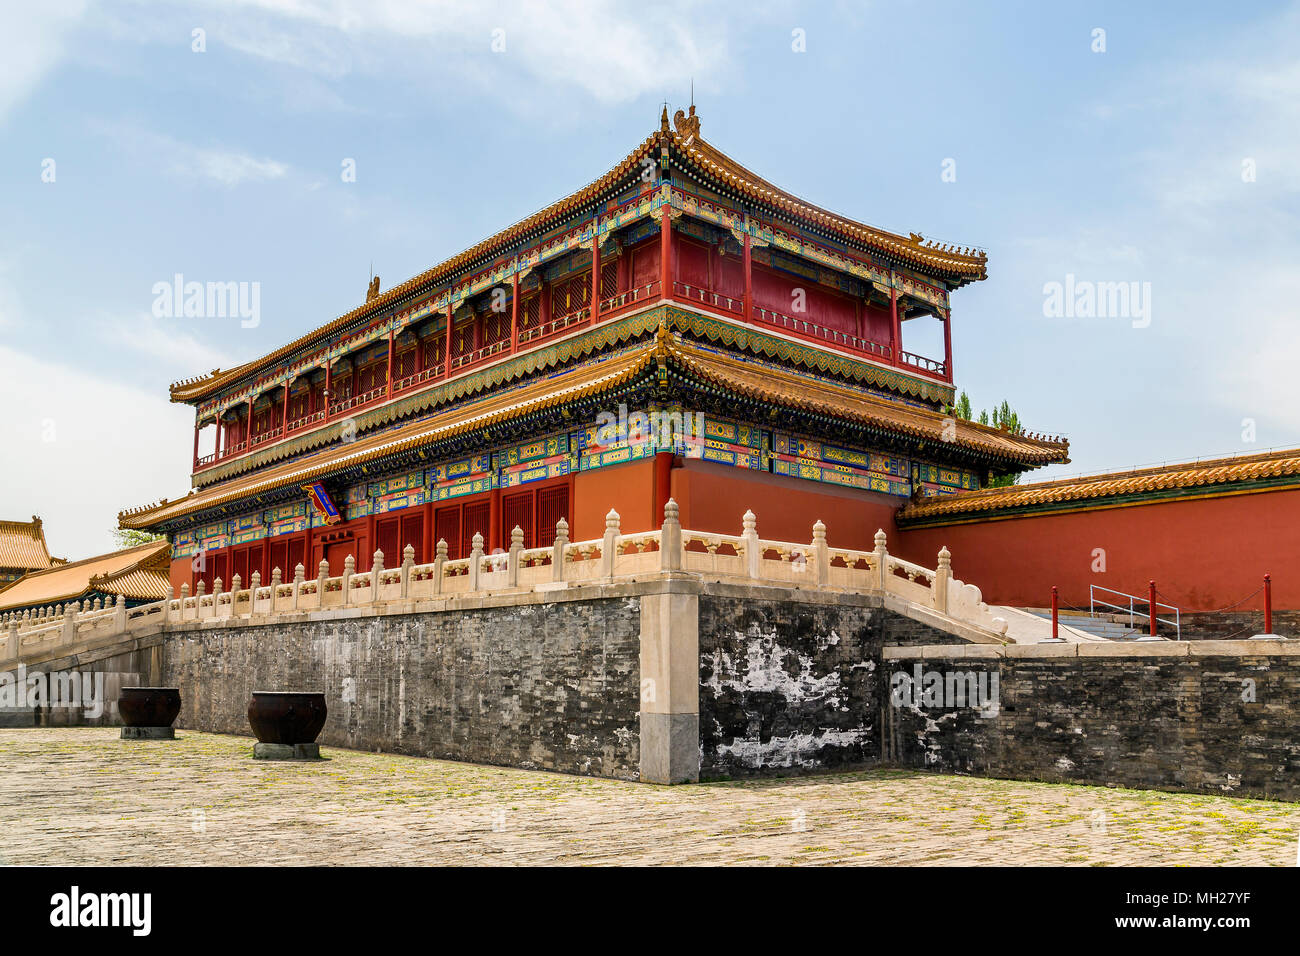 The Pavilion of Rigorous Justice with it's elaborate decoration and yellow glazed tile roof. Forbidden City, Beijing, China. Stock Photo